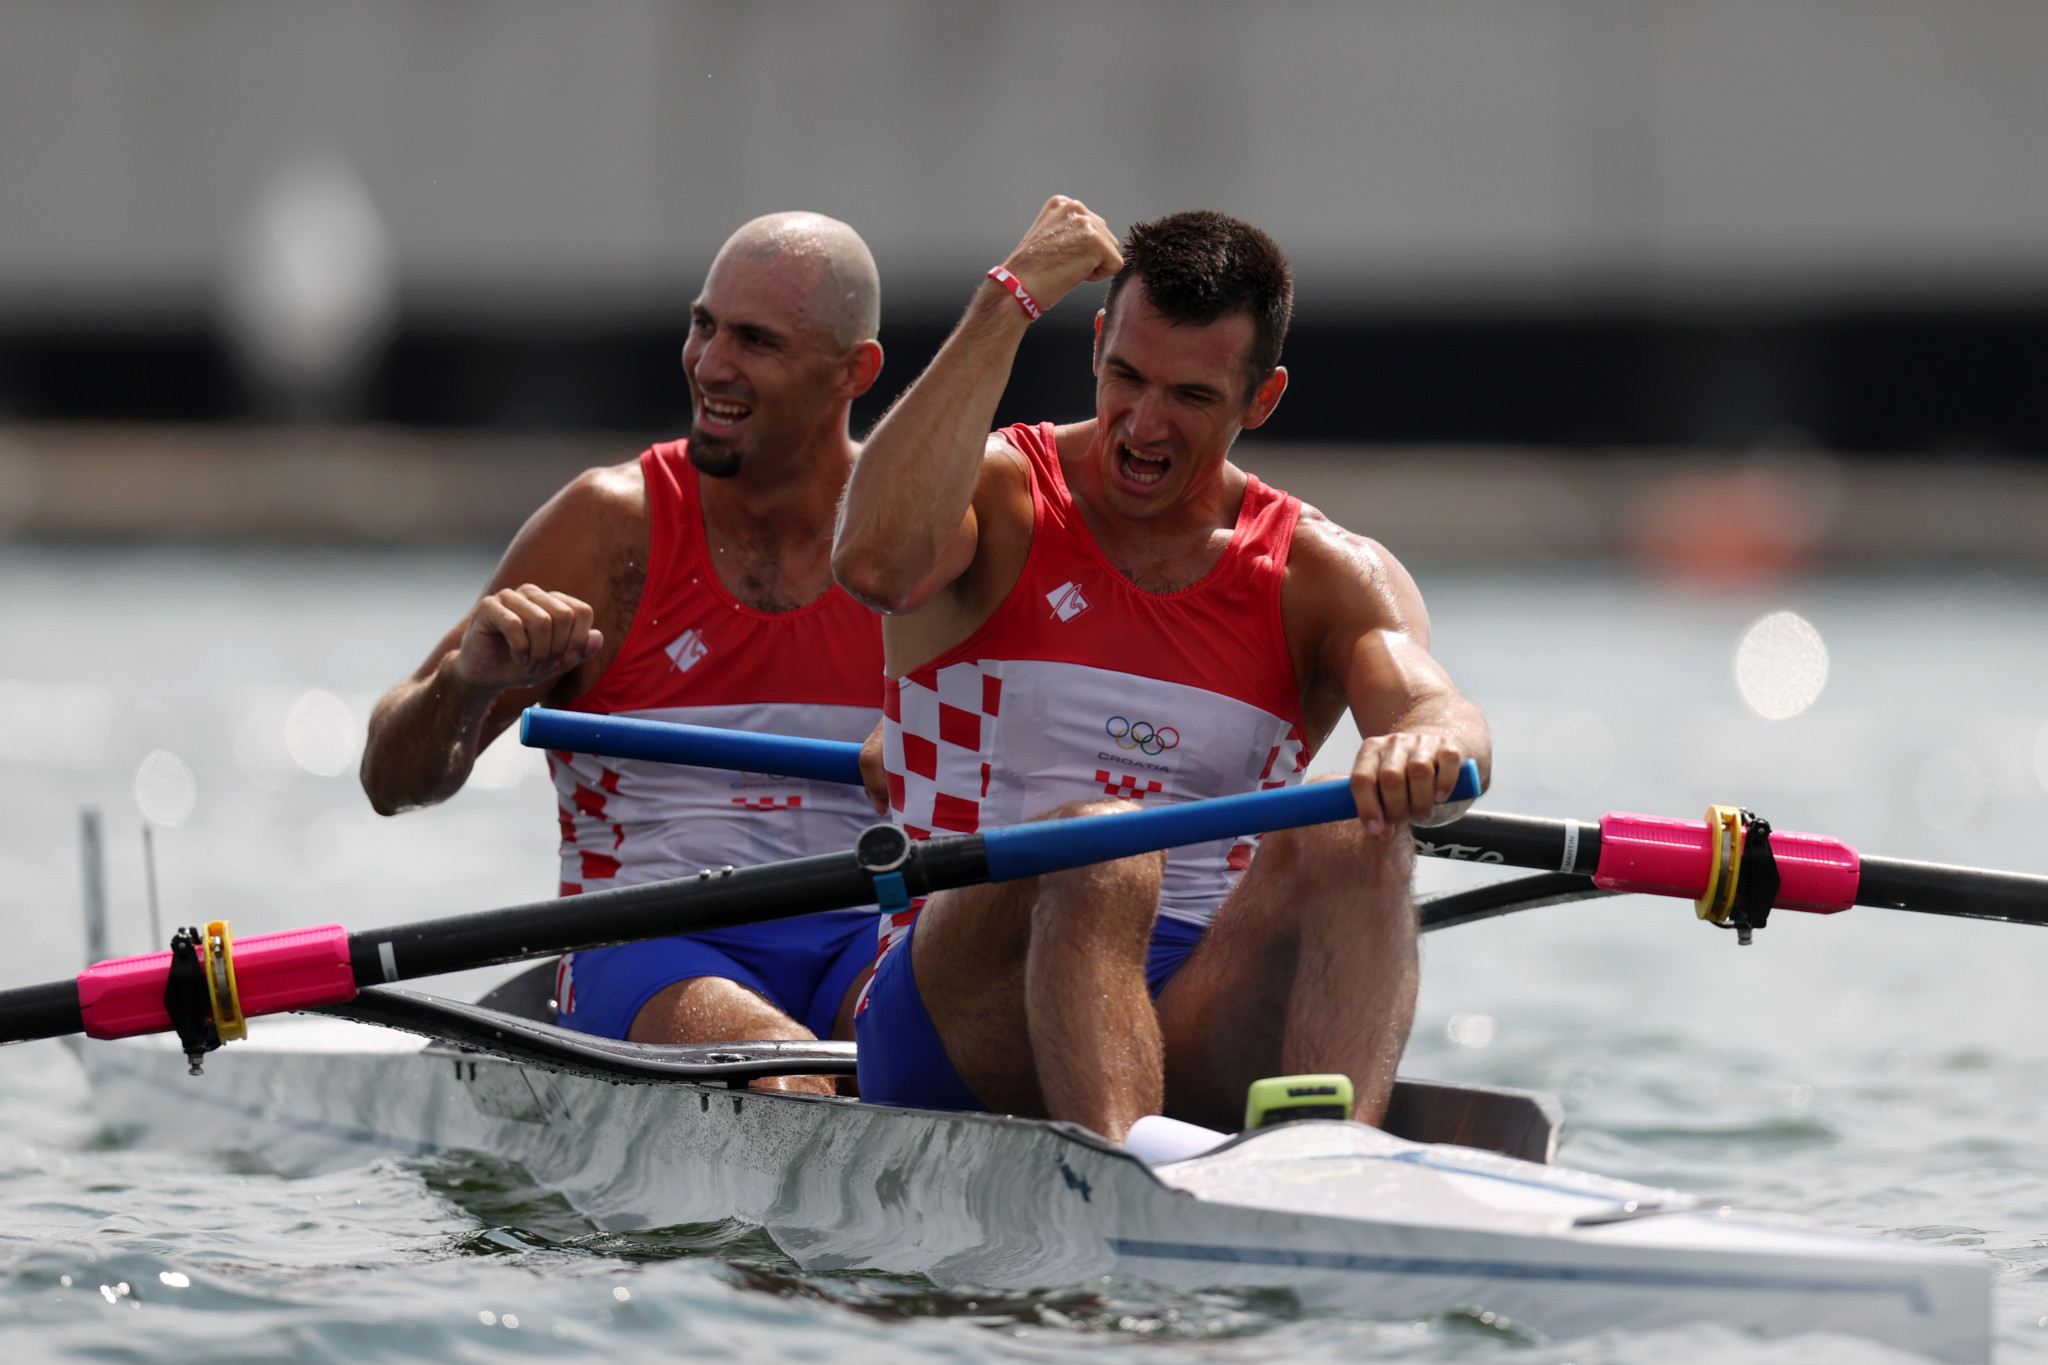 Two-time Olympic champions Martin Sinković, left, and Valent Sinković, right, are among the hope hopefuls at the World Rowing Cup in Zagreb ©Getty Images